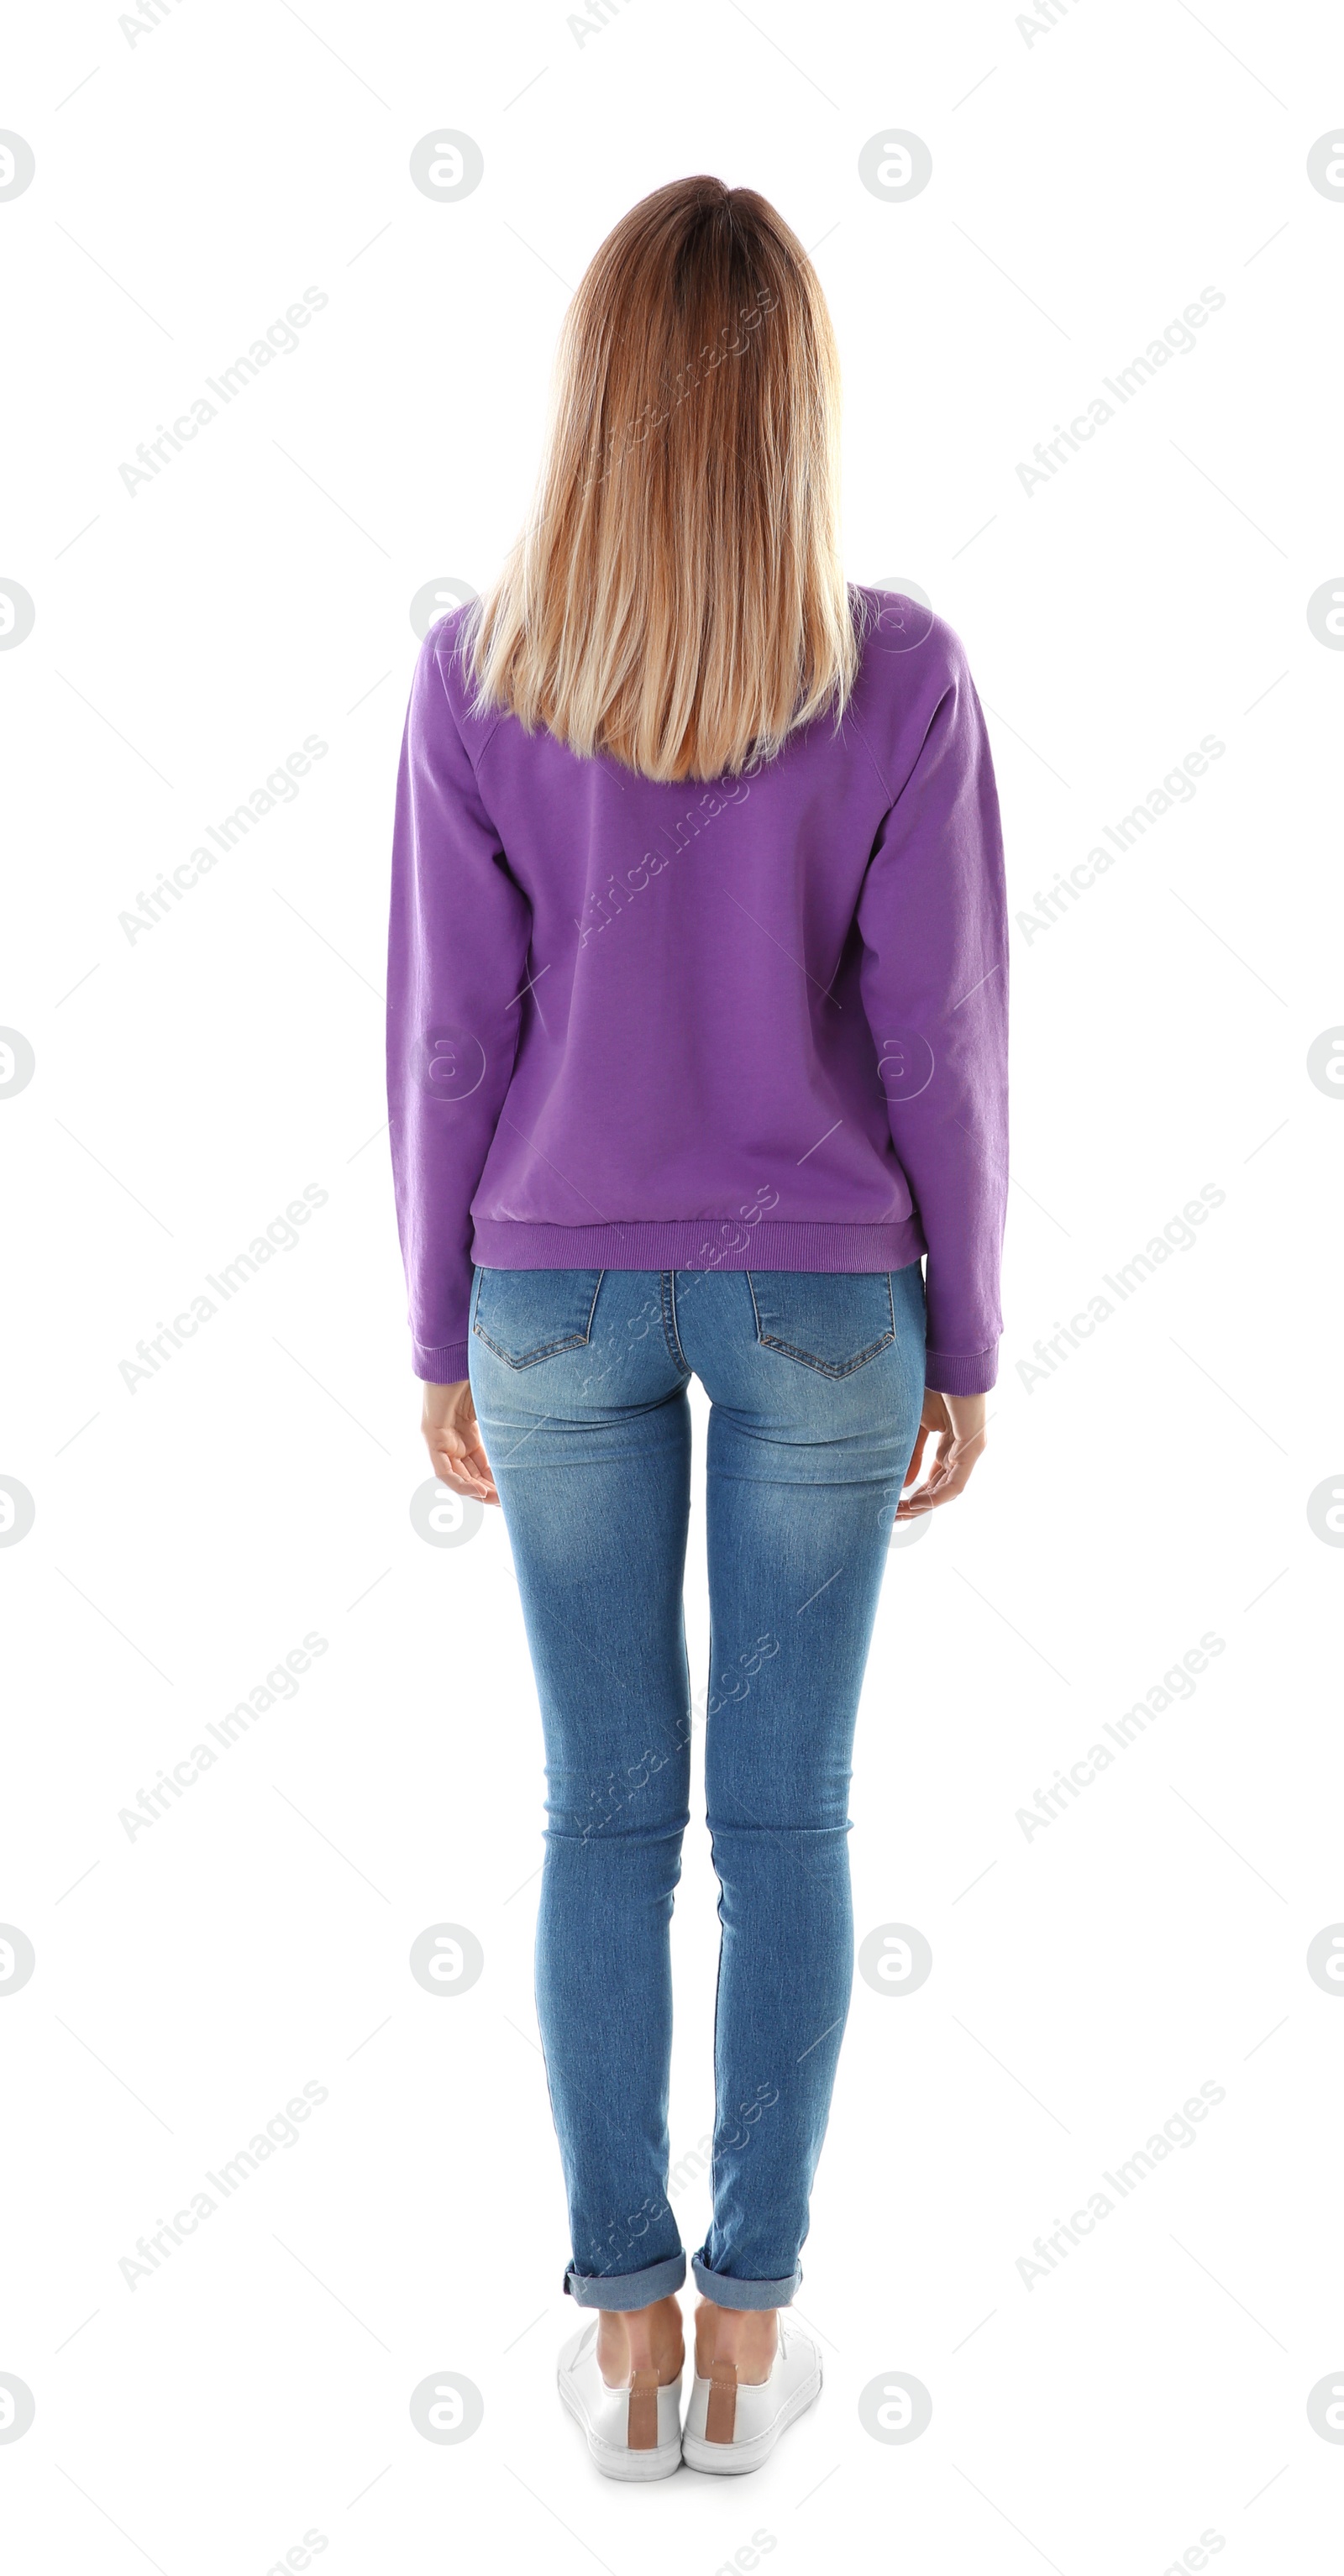 Photo of Blonde woman with long hair posing on white background